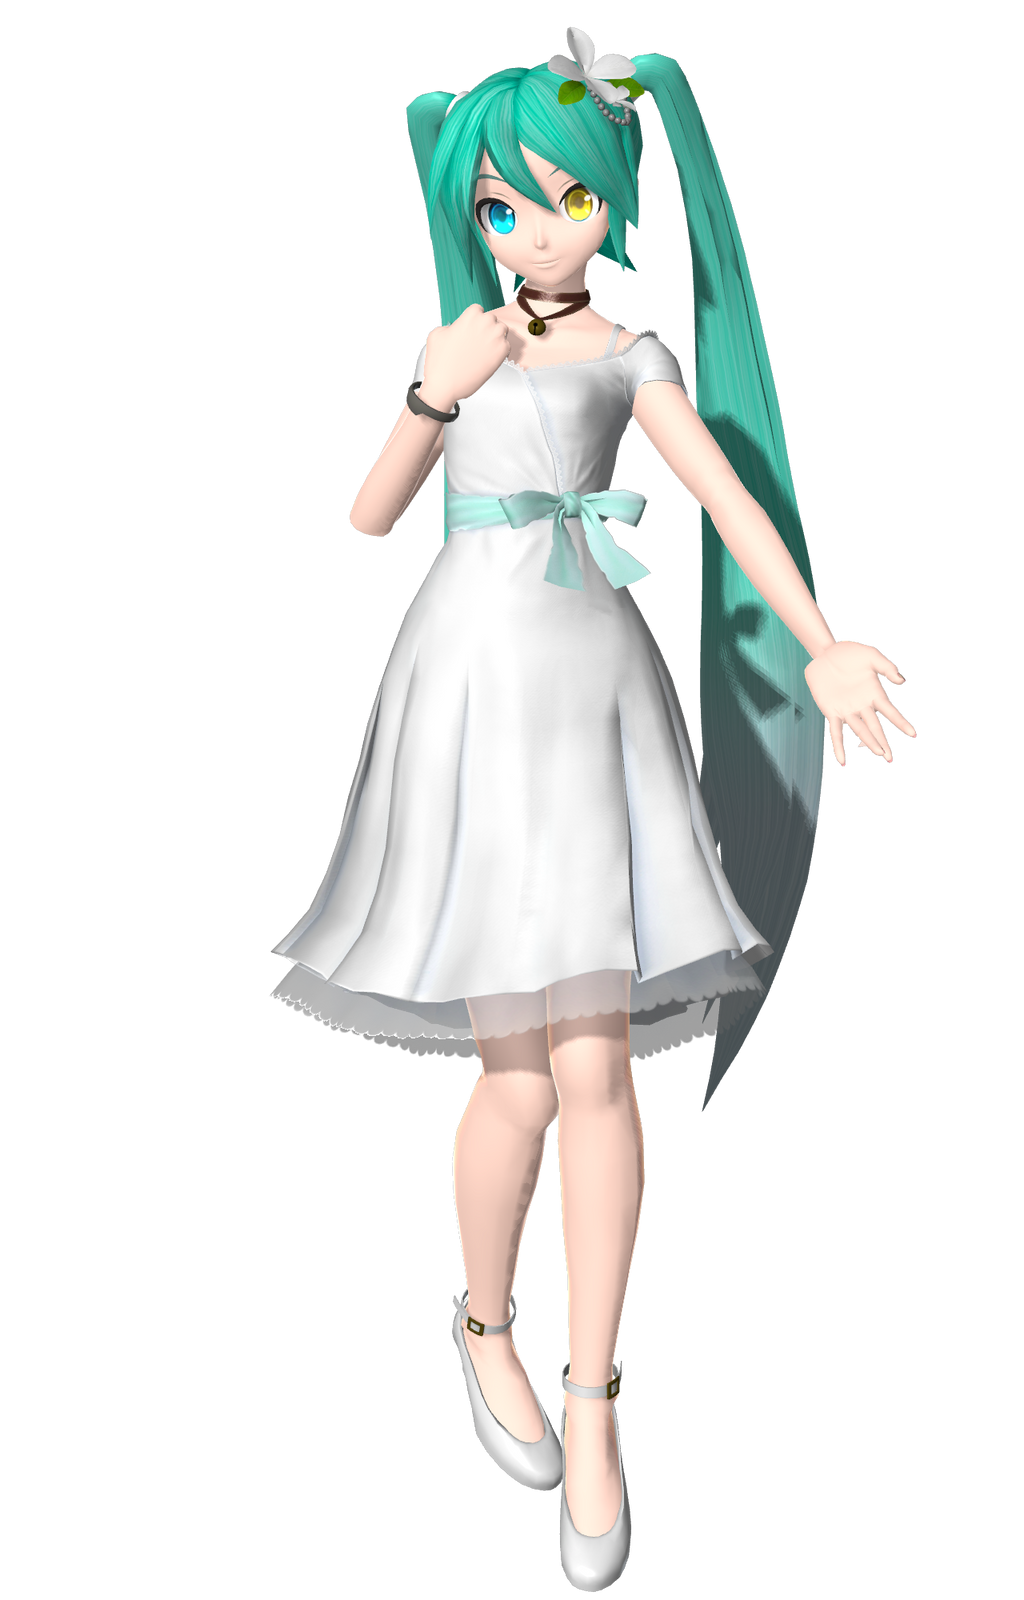 dt_extend_white_eve_miku_by_chocofudge98